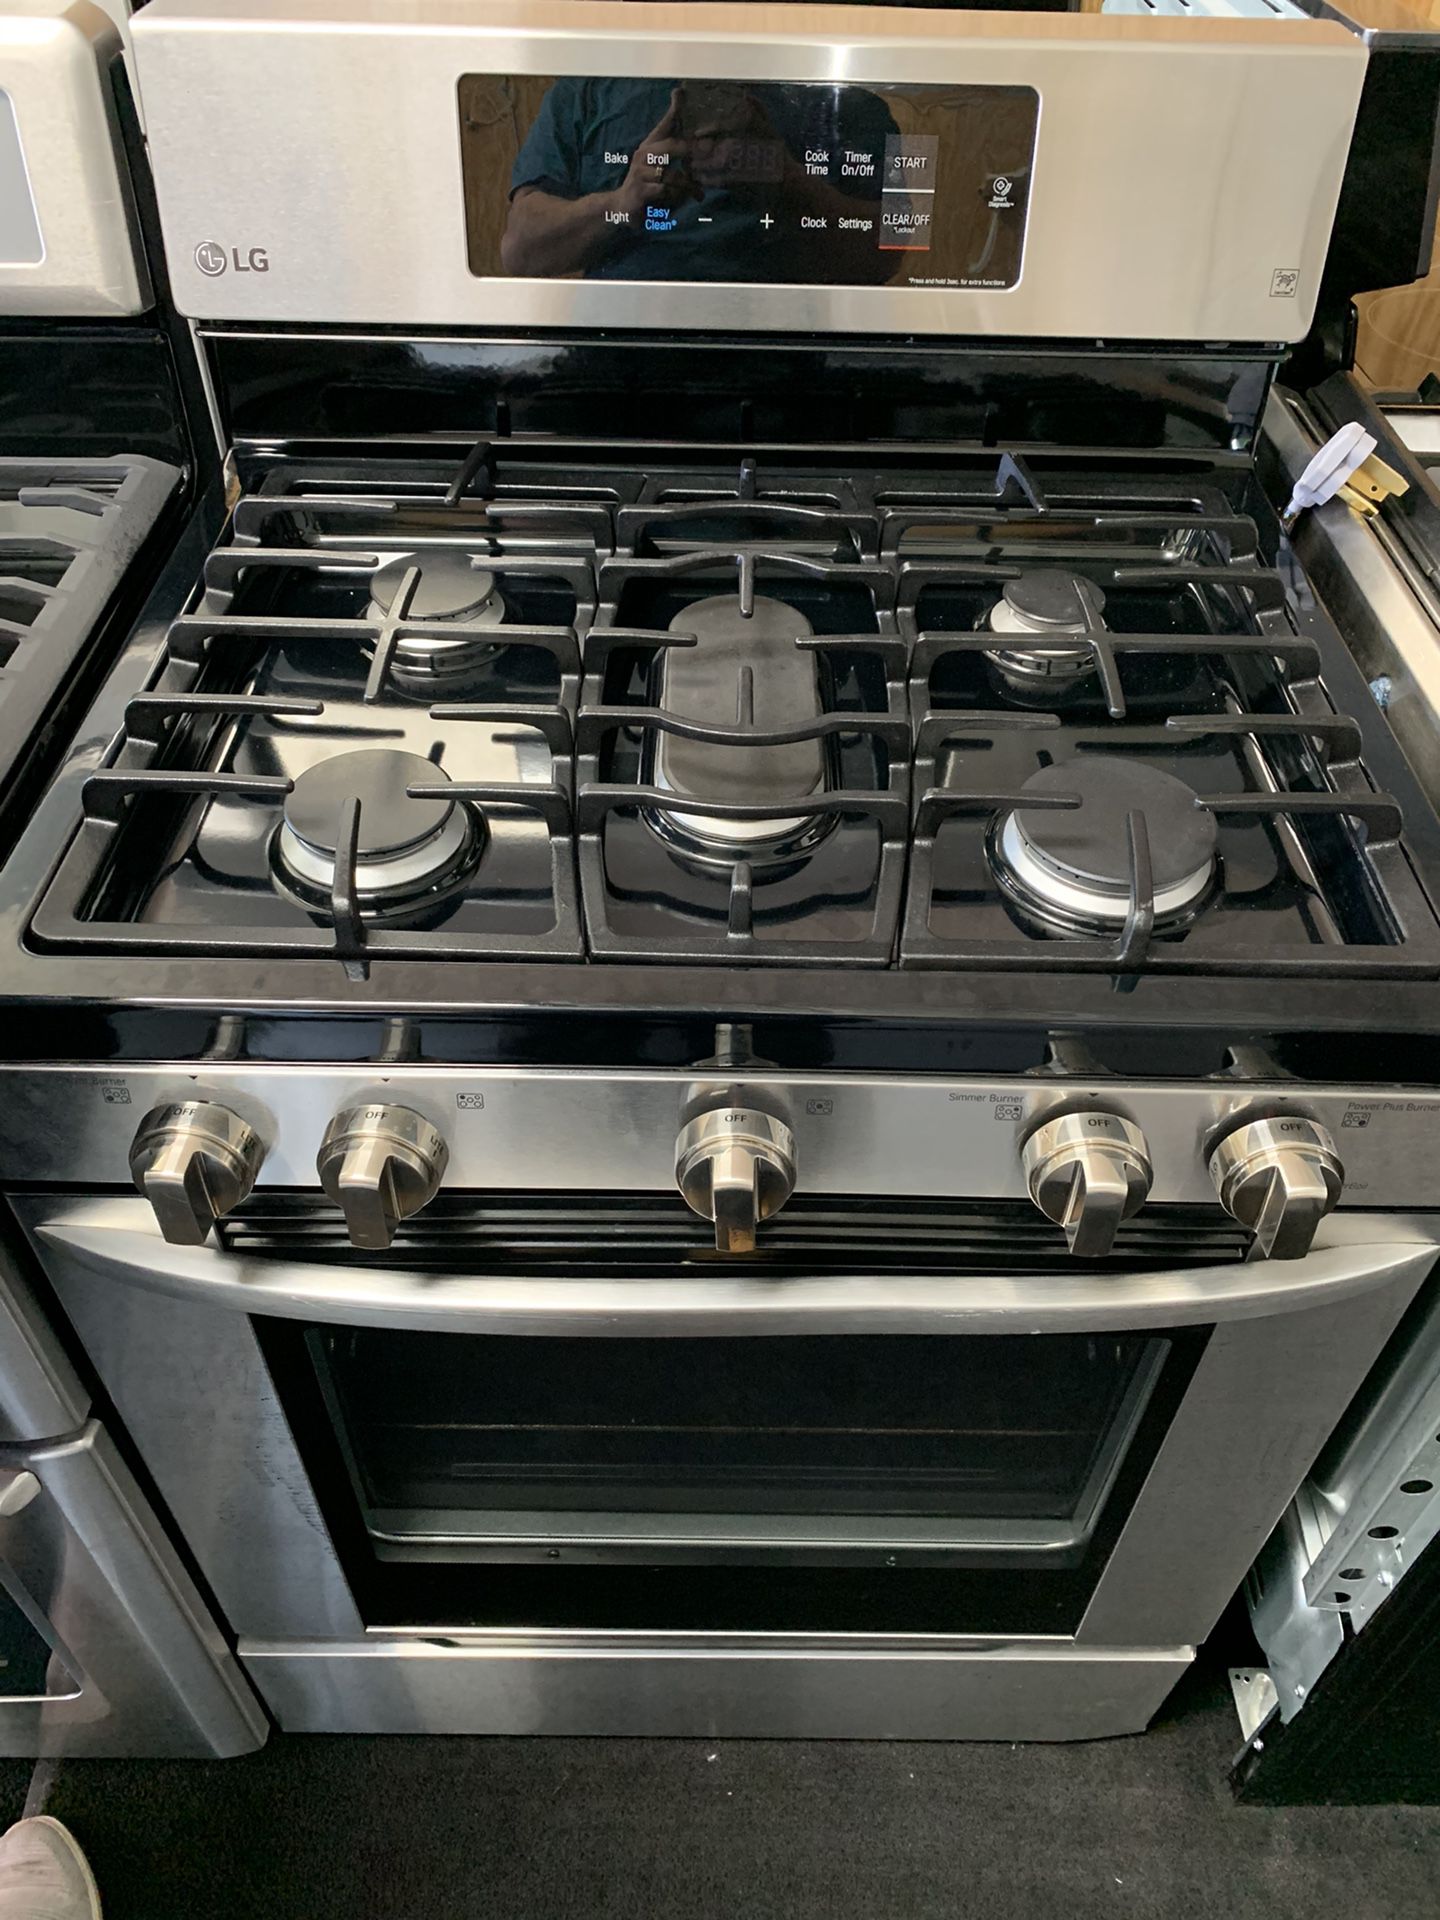 LG Stainless steel gas stove with 90 day warranty